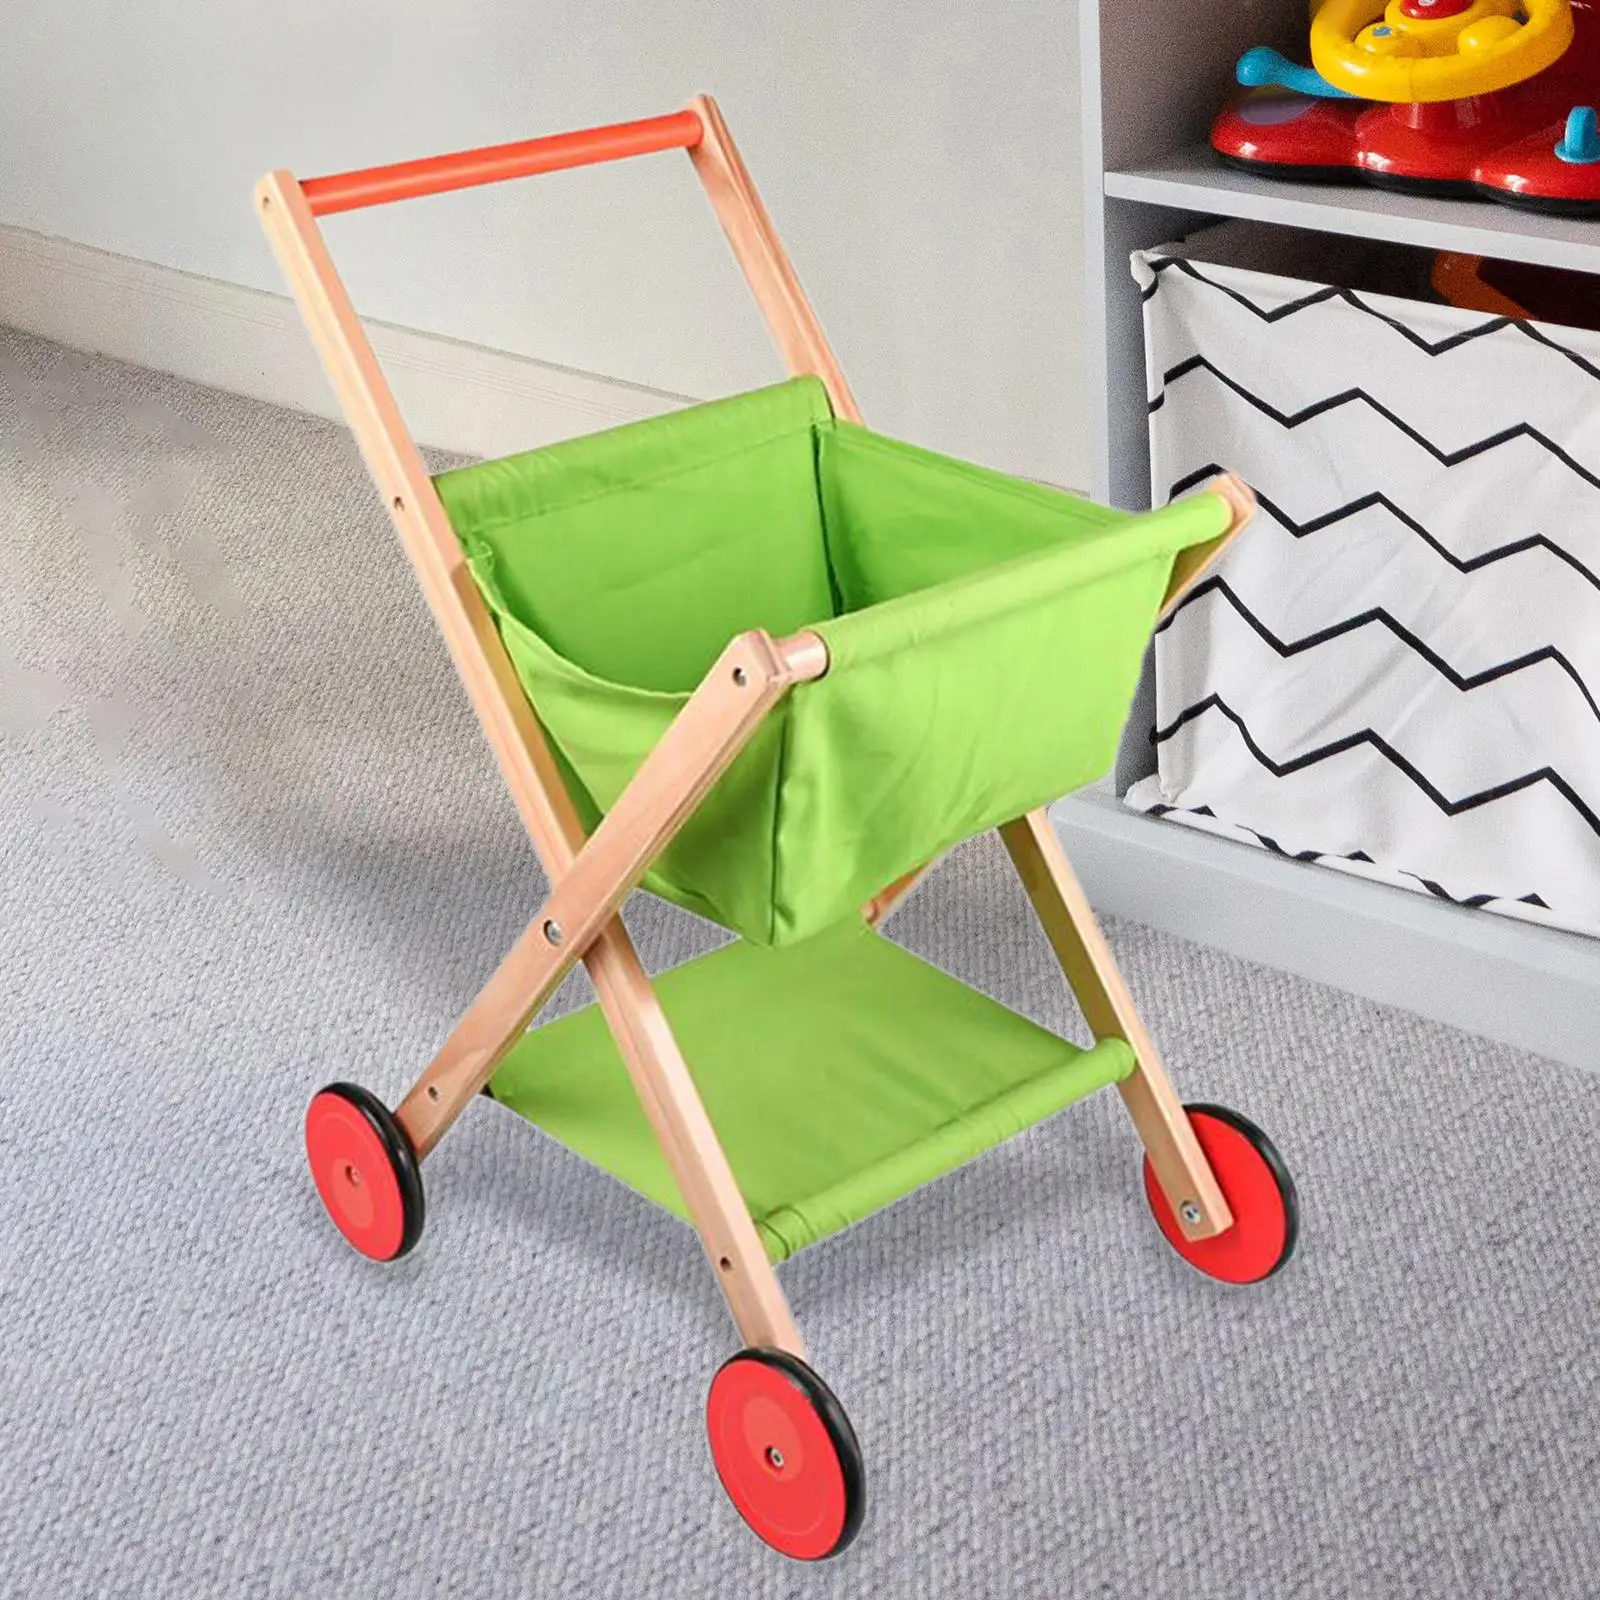 Simulated Grocery Store Shopping Trolley Role Play Toy Pretend Play Supermarket Playset Wood Shopping Cart for Childern Gifts